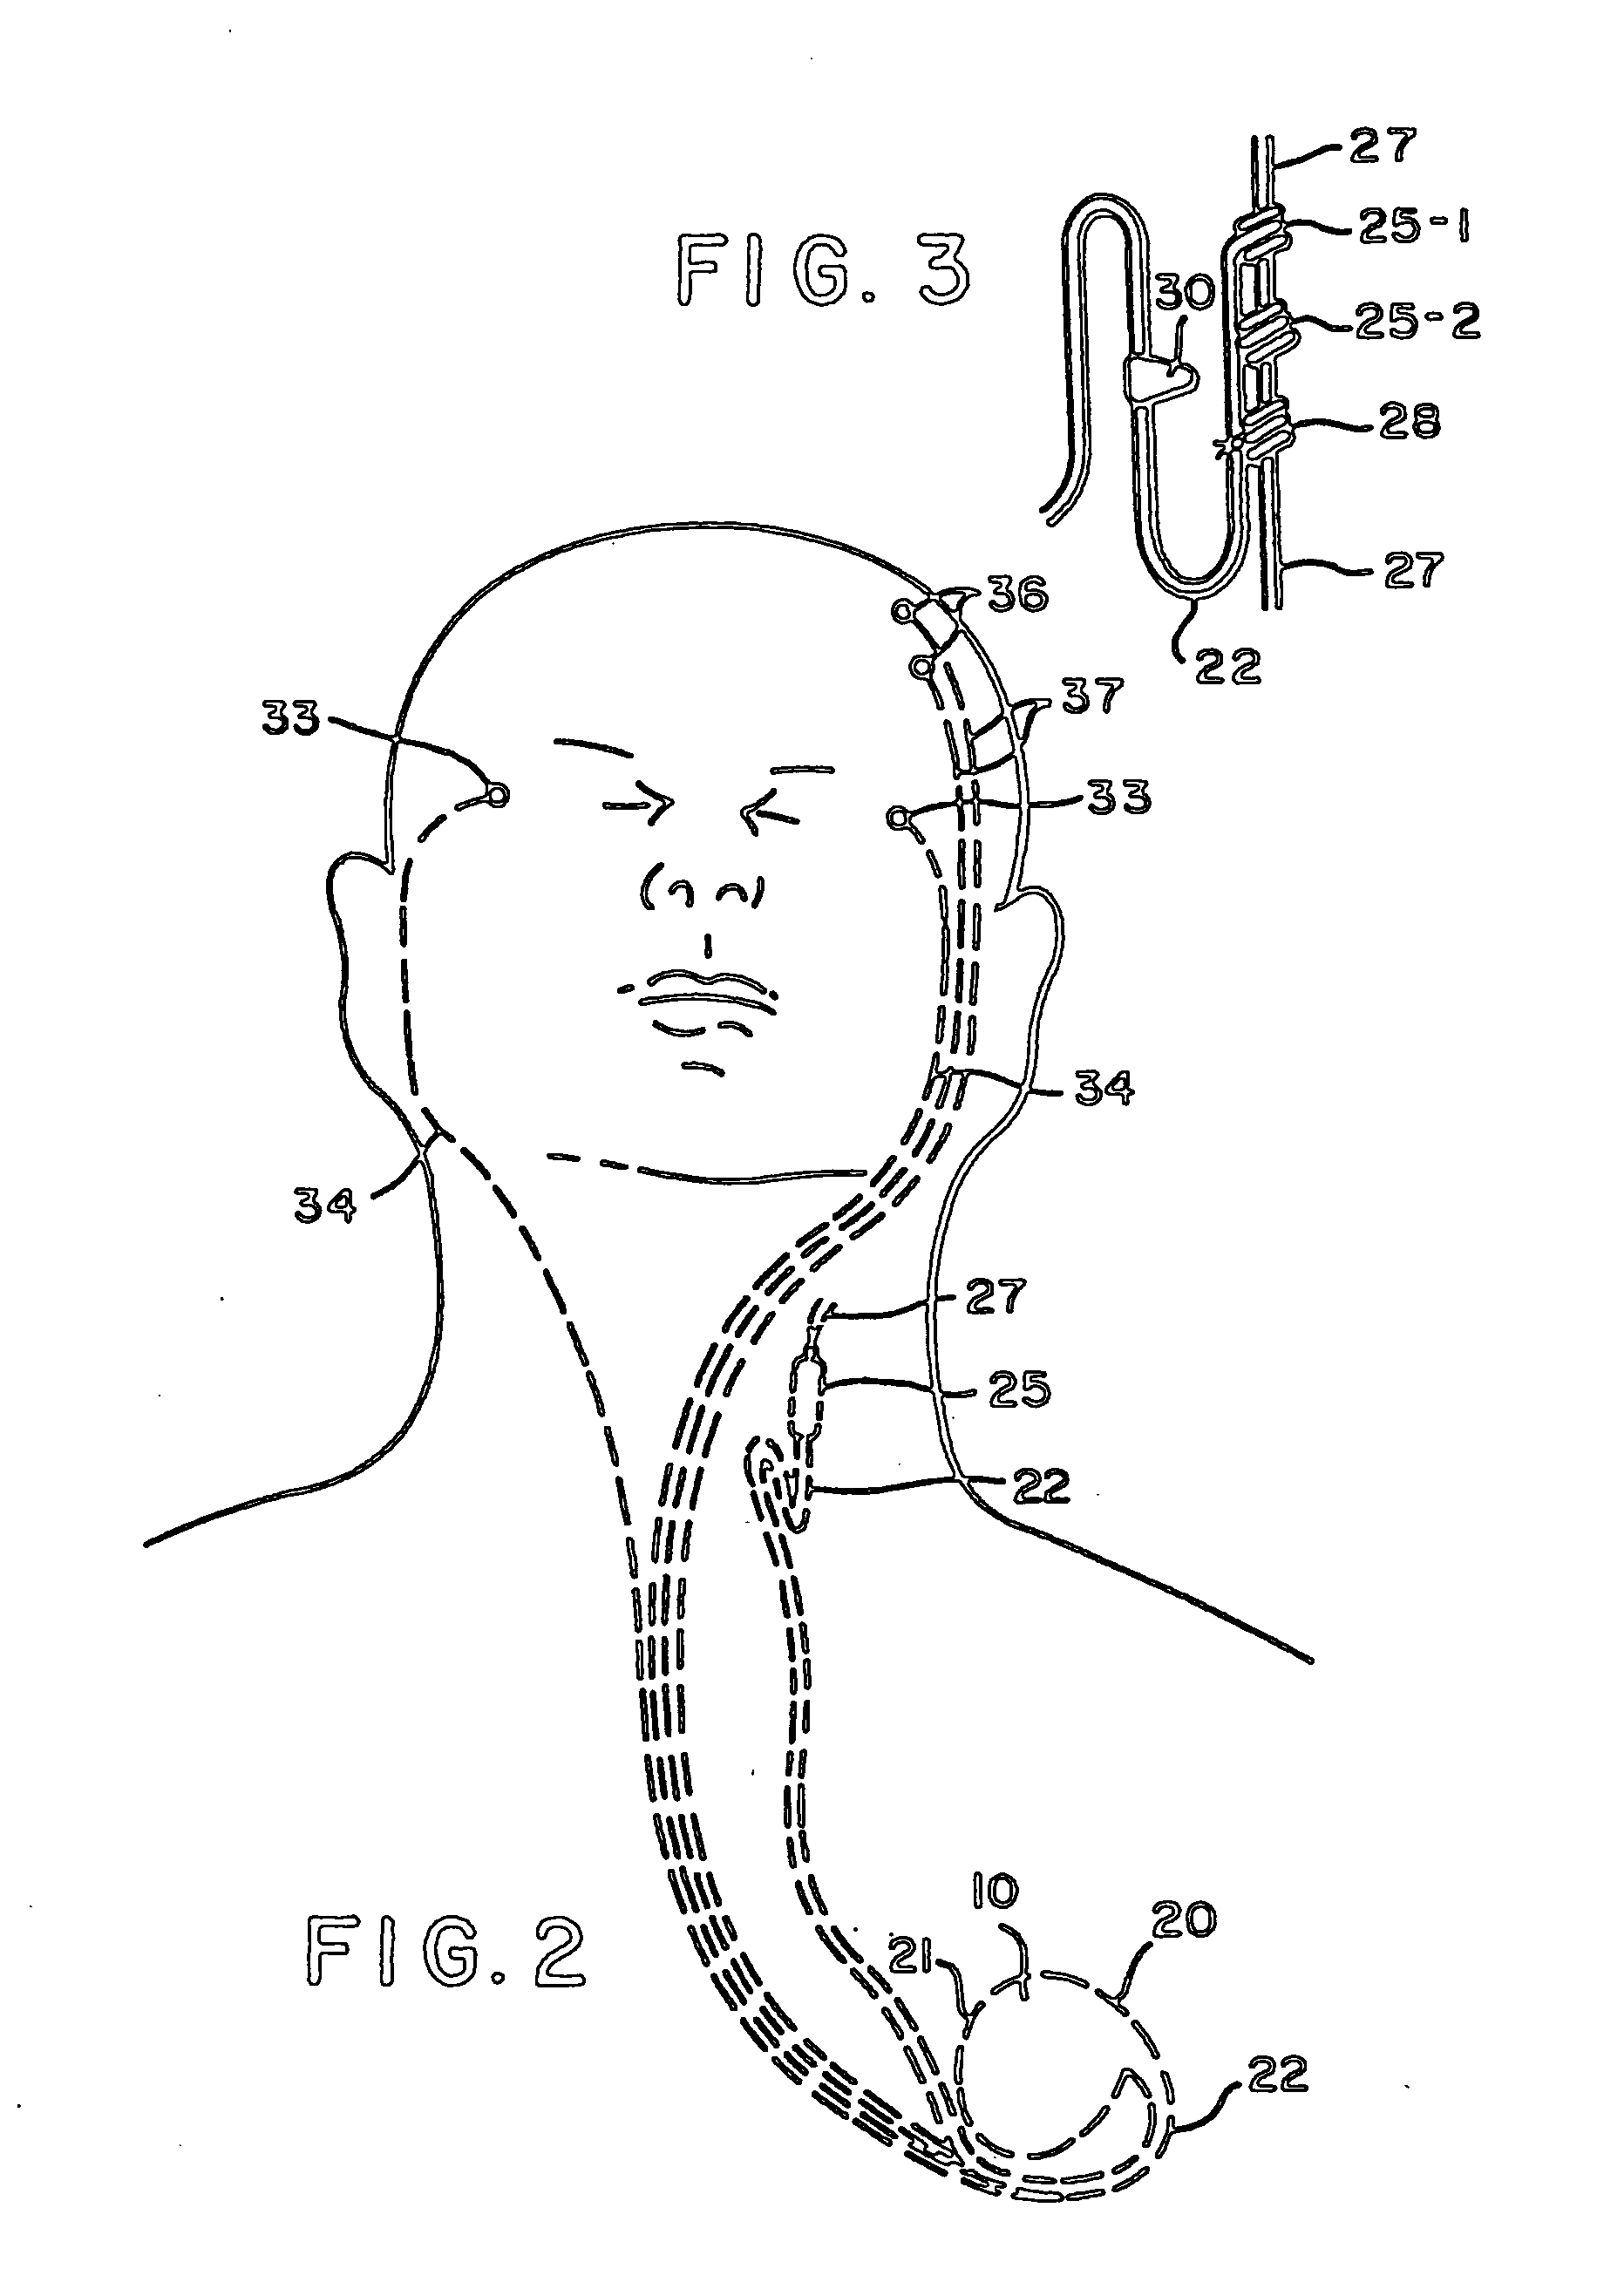 Vagus nerve stimulation for treatment of depression with therapeutically beneficial parameter settings